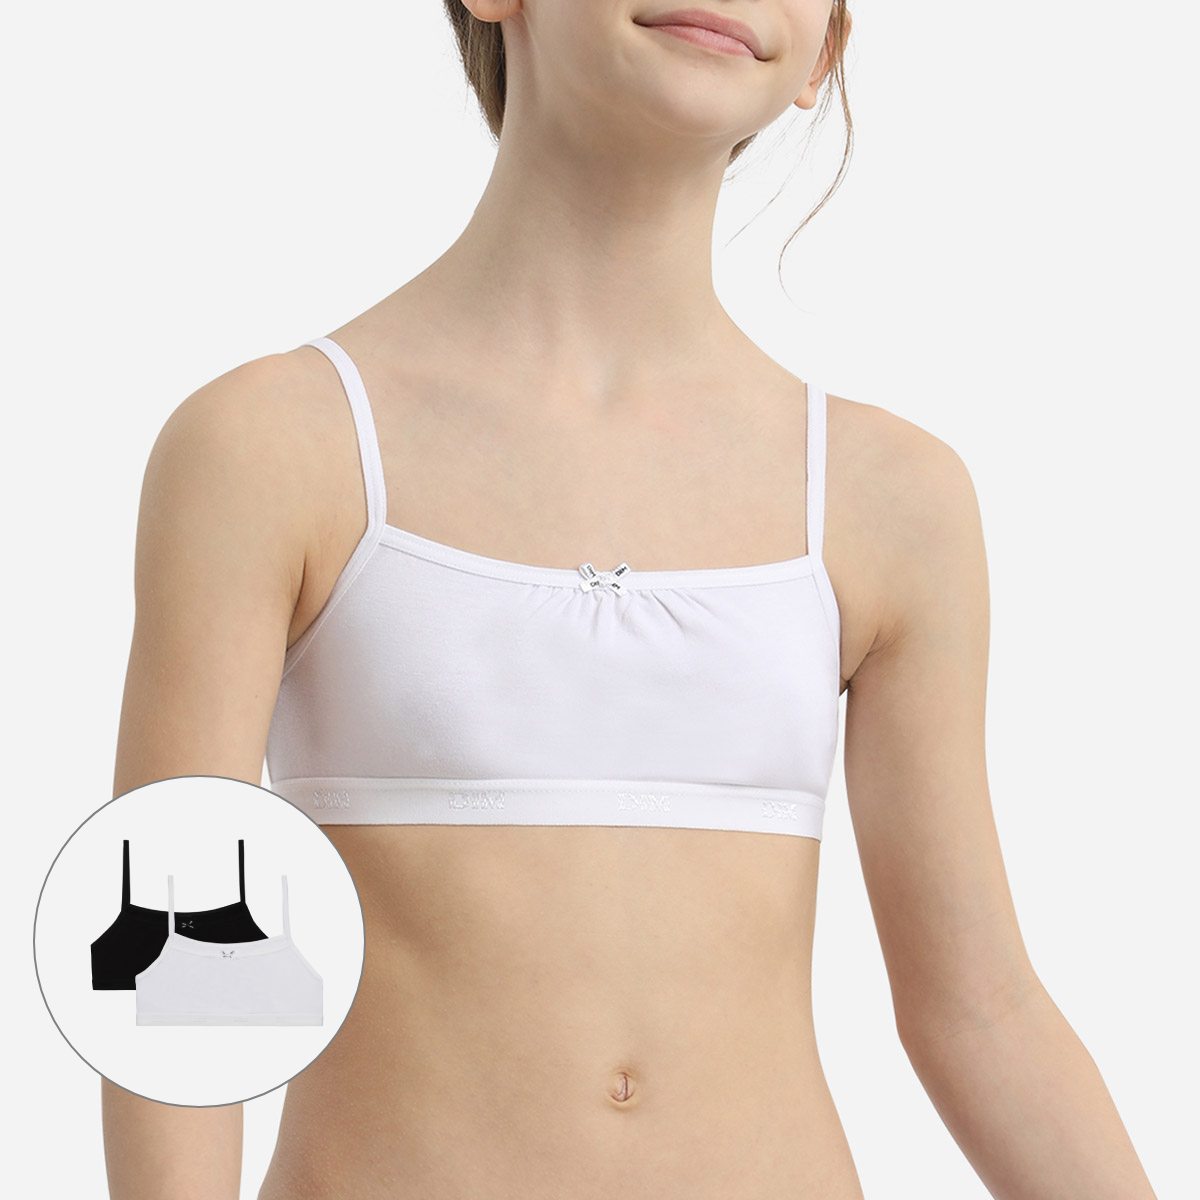 Girls Cotton Training Bra With Buckle No Steel Ring, Ideal For Sports And  Toddler Underwear Model 1031 Y2 From Dp02, $2.29